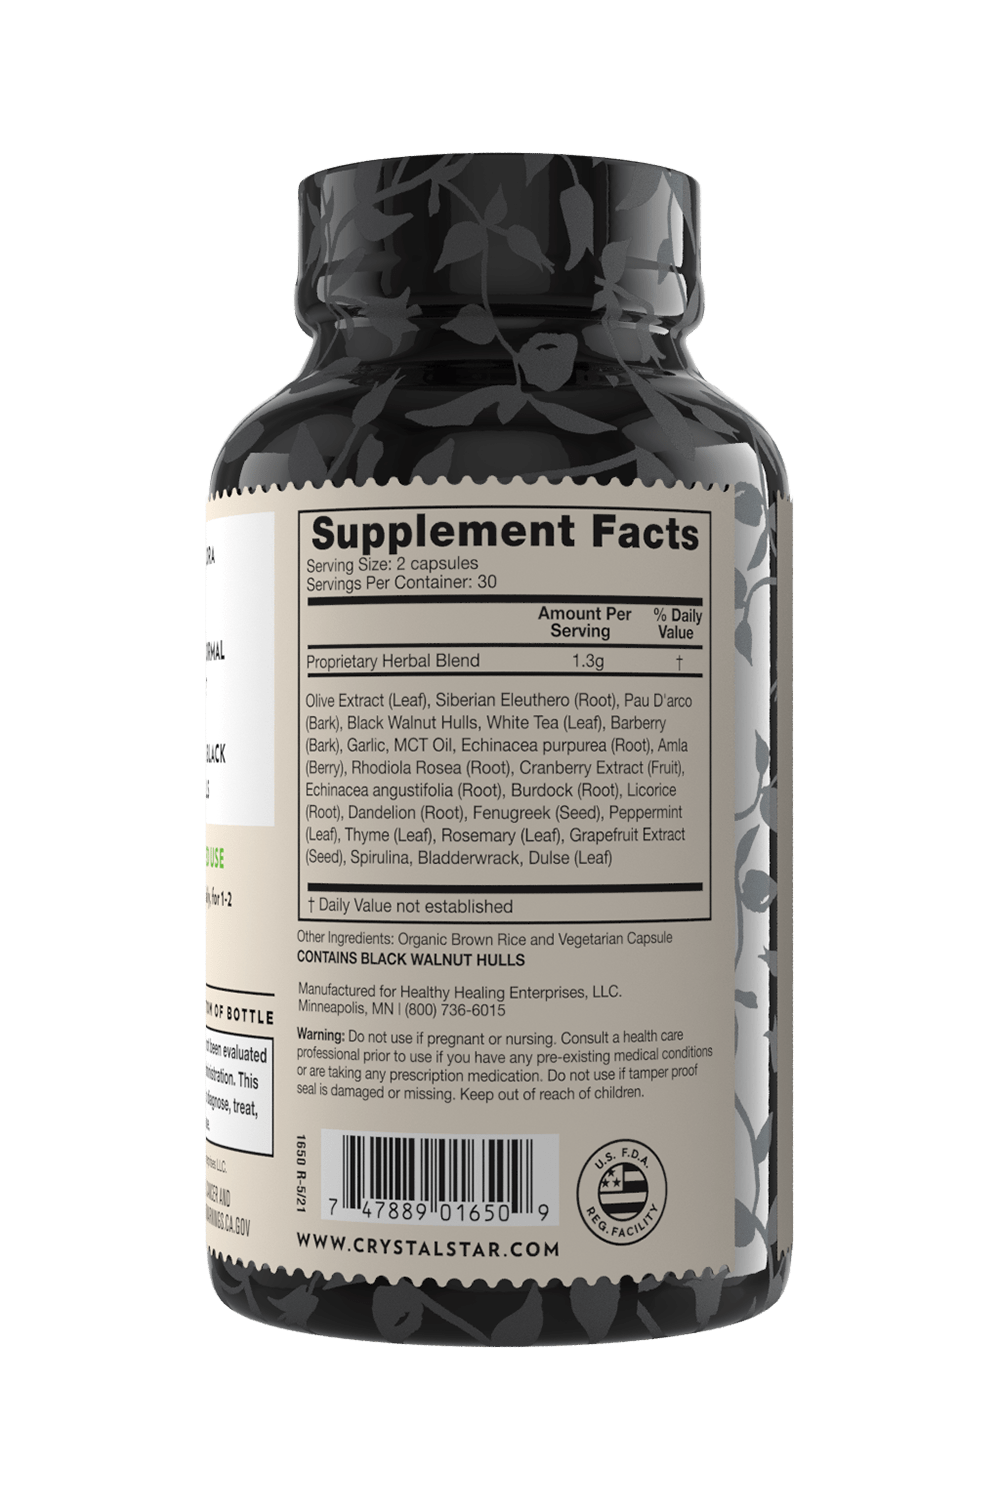 Crystal Star Candida Balance supplement for microbiome health, Ingredients